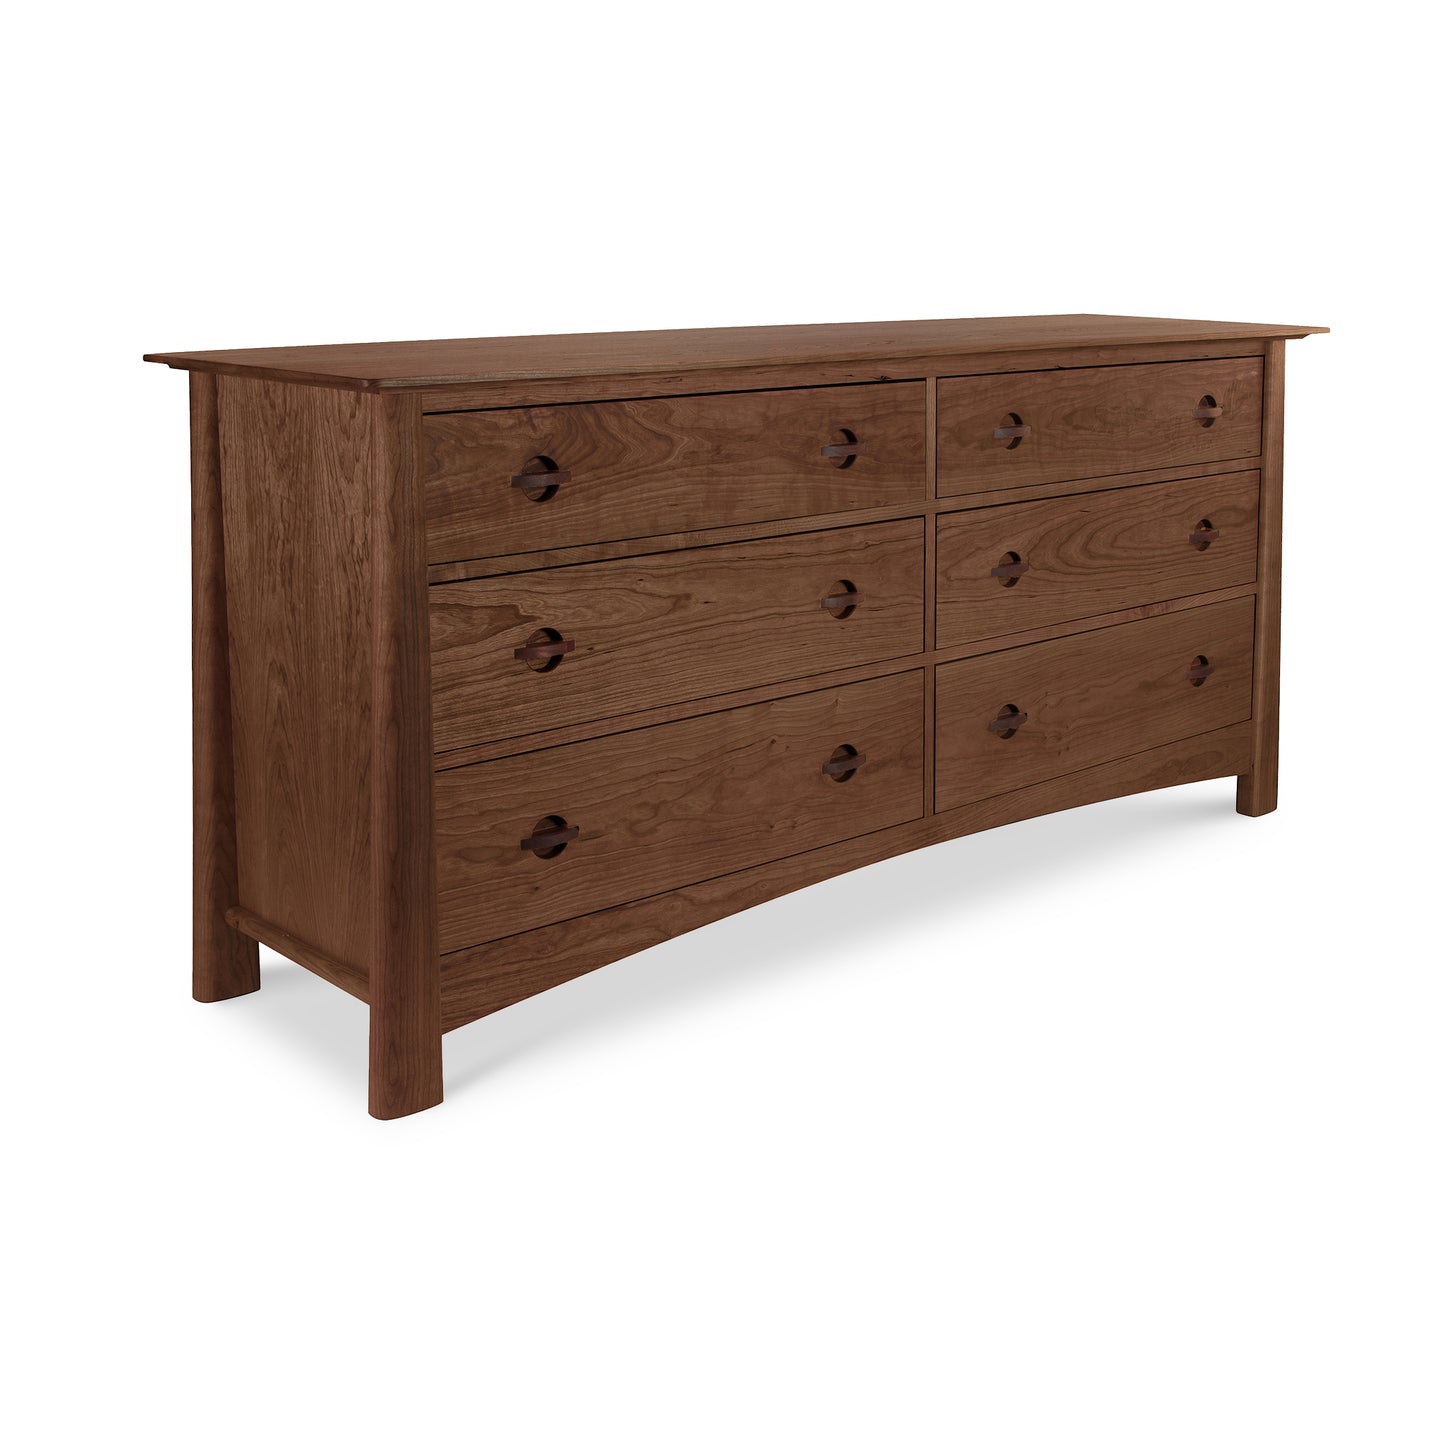 A Maple Corner Woodworks Cherry Moon 6-Drawer Dresser, handmade for an eco-friendly touch.